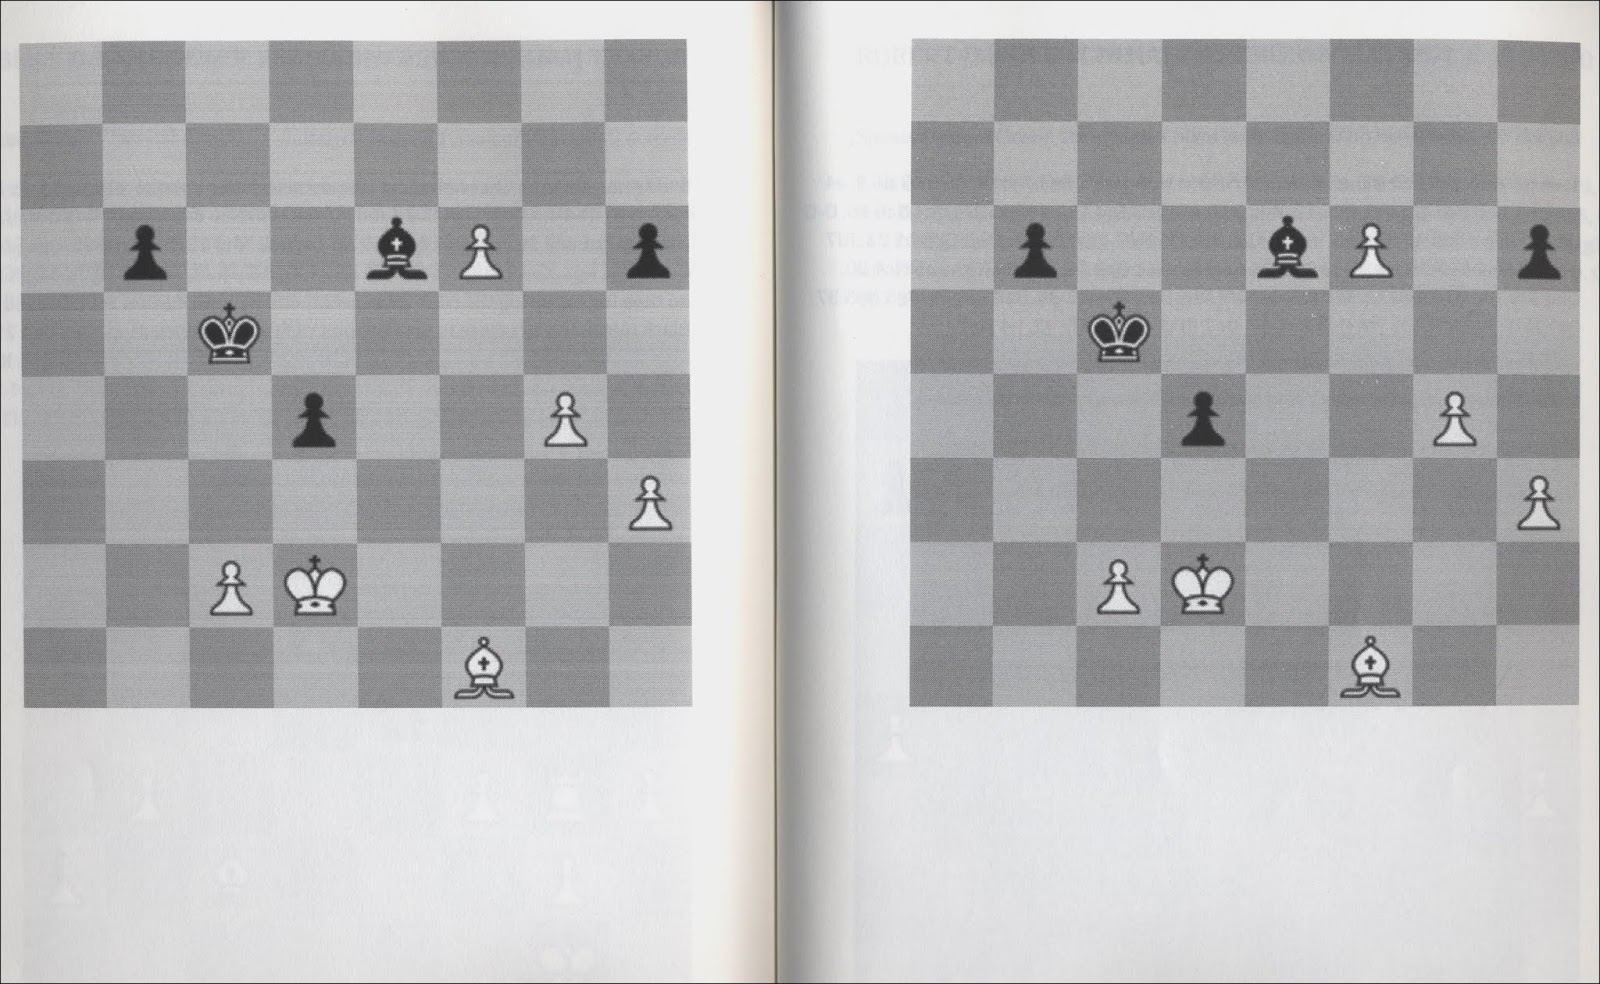 Chess Book Chats: A shambolic book on Fischer